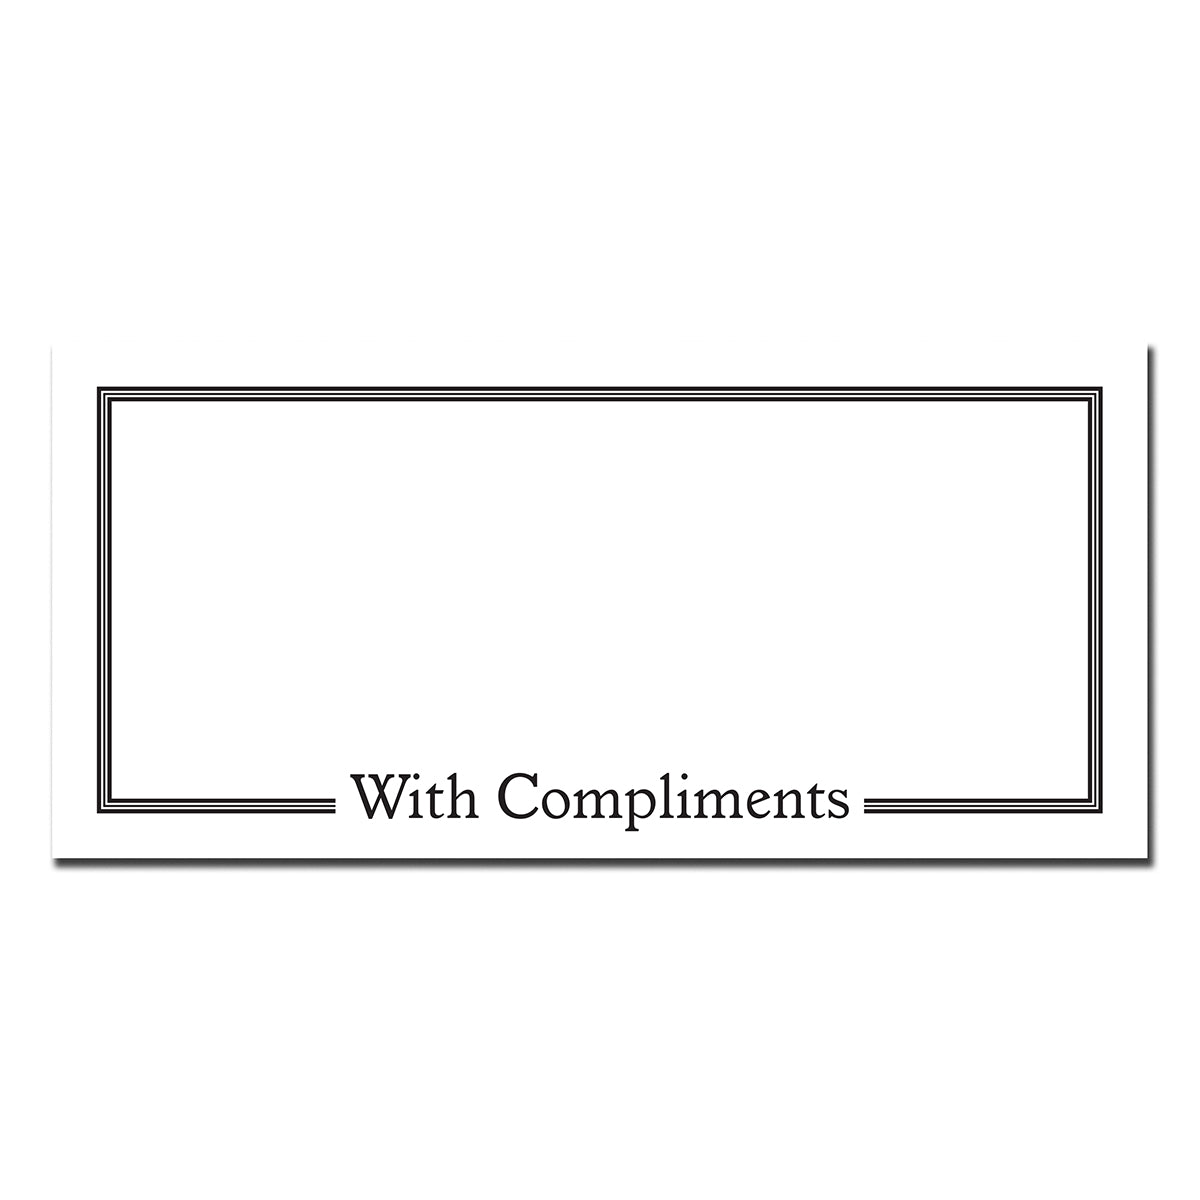 Compliment Slip Pad 99mm x 210mm (DL) 100 sheets of 120gsm